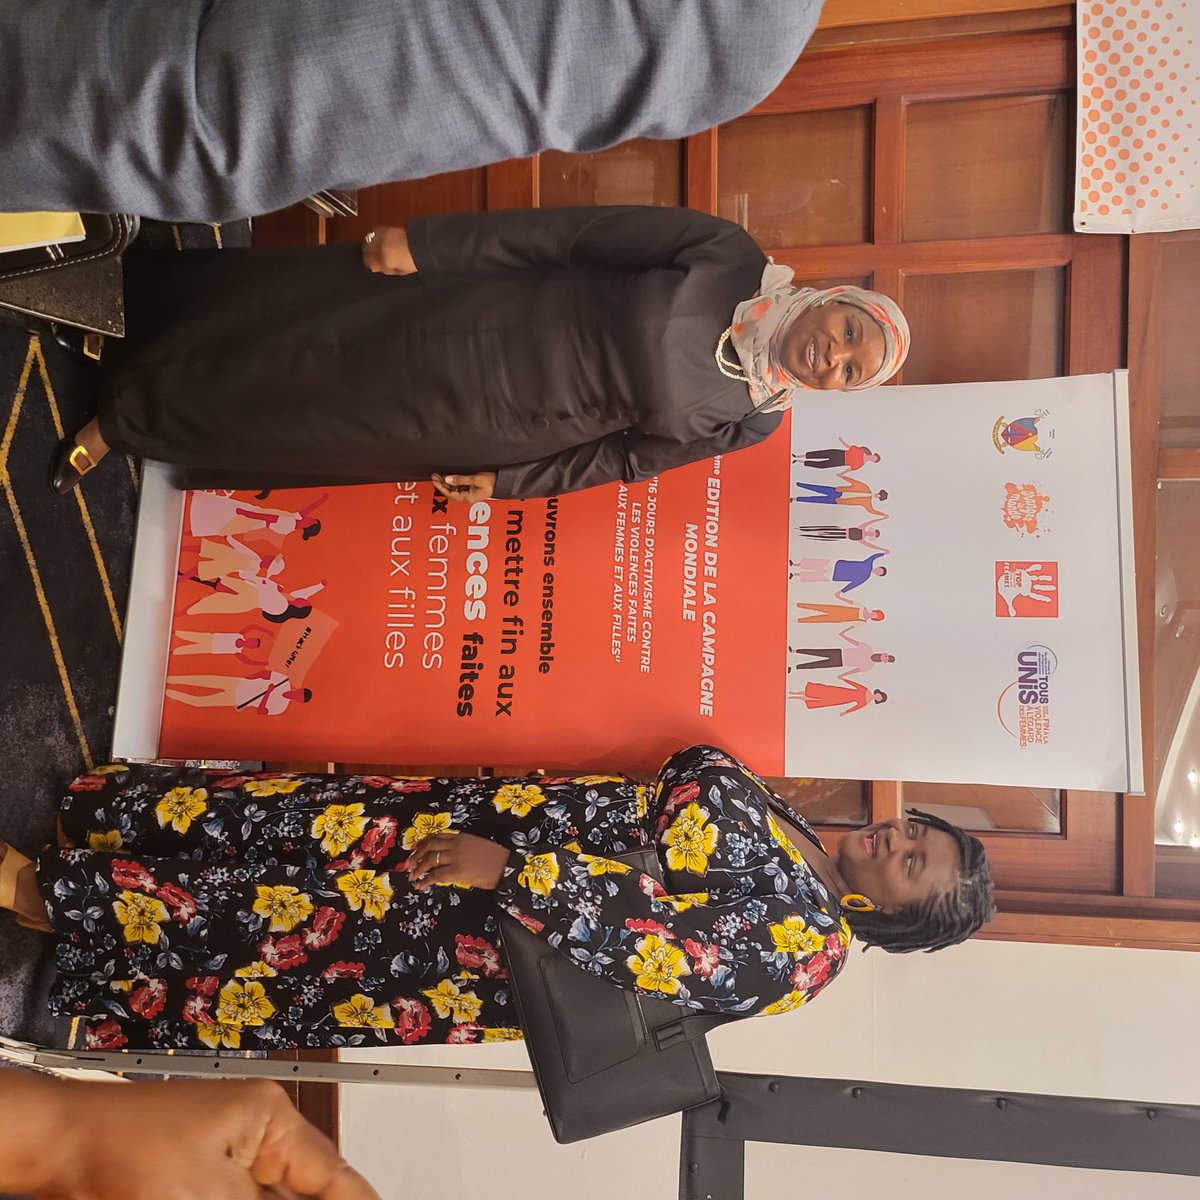 Today l was a panelist at the launch of the#Cameroon national GBV mapping and presented on HRs and GBV highlighting GBV as a HR violation#16DaysActivism #GBV @Zahralillian @GaDjournal @WPSHACompact @Women_Rio20 @IDS_UK @WHO @Oxfamgb @gnwp_gnwp @ISHRglobal @whatthewomensay